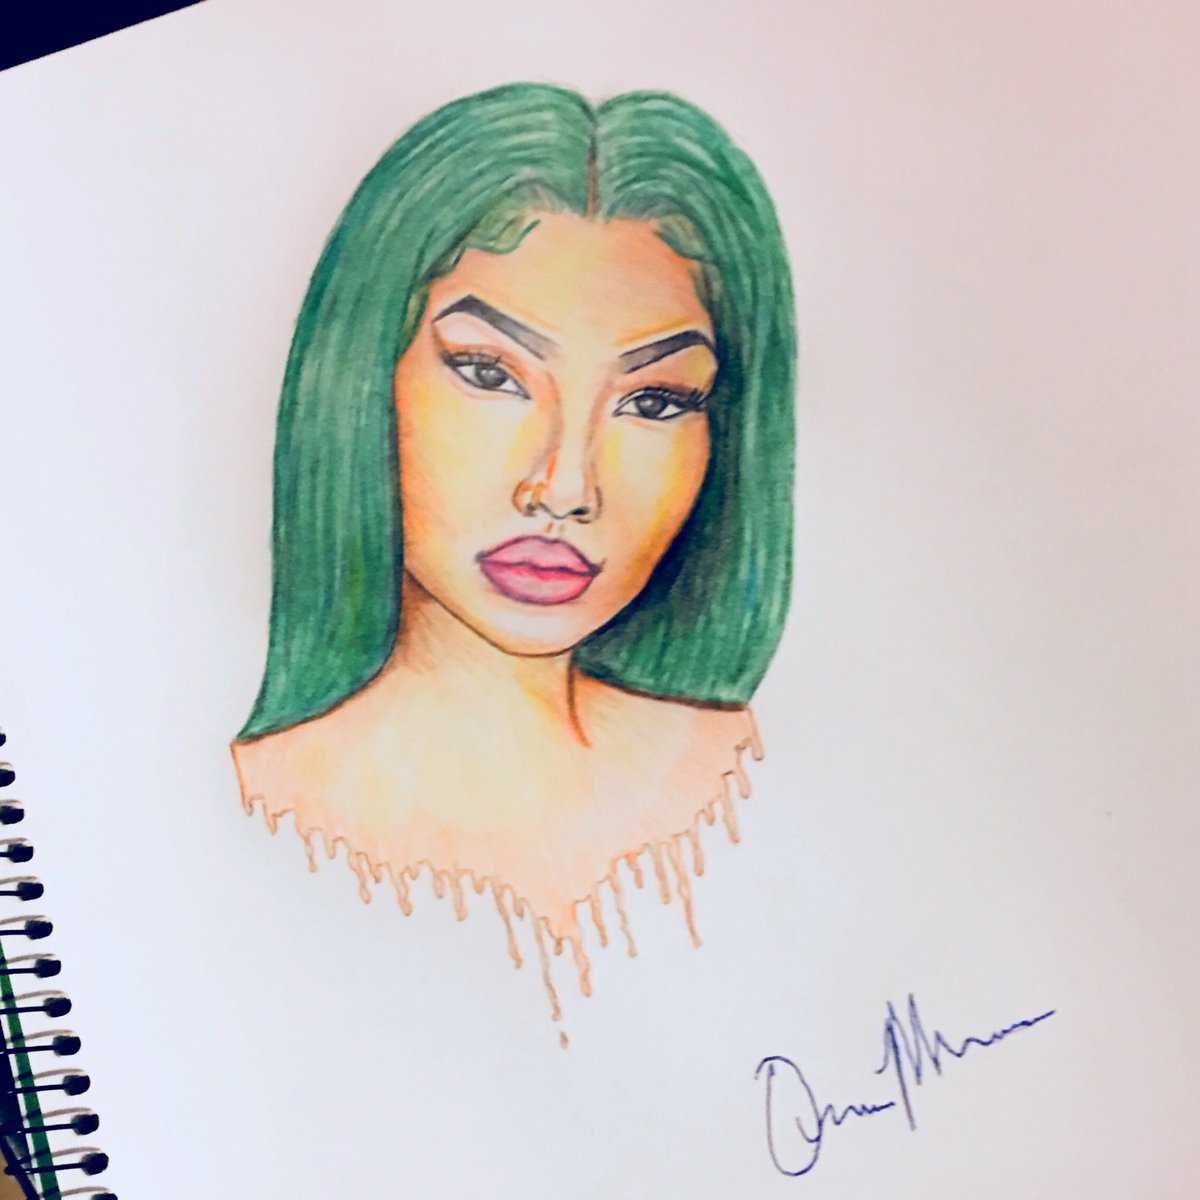 RT @__quenterius: Petunia wit the green hair????????????(art by yours truly) @TEYANATAYLOR https://t.co/uMcQa0VUf5